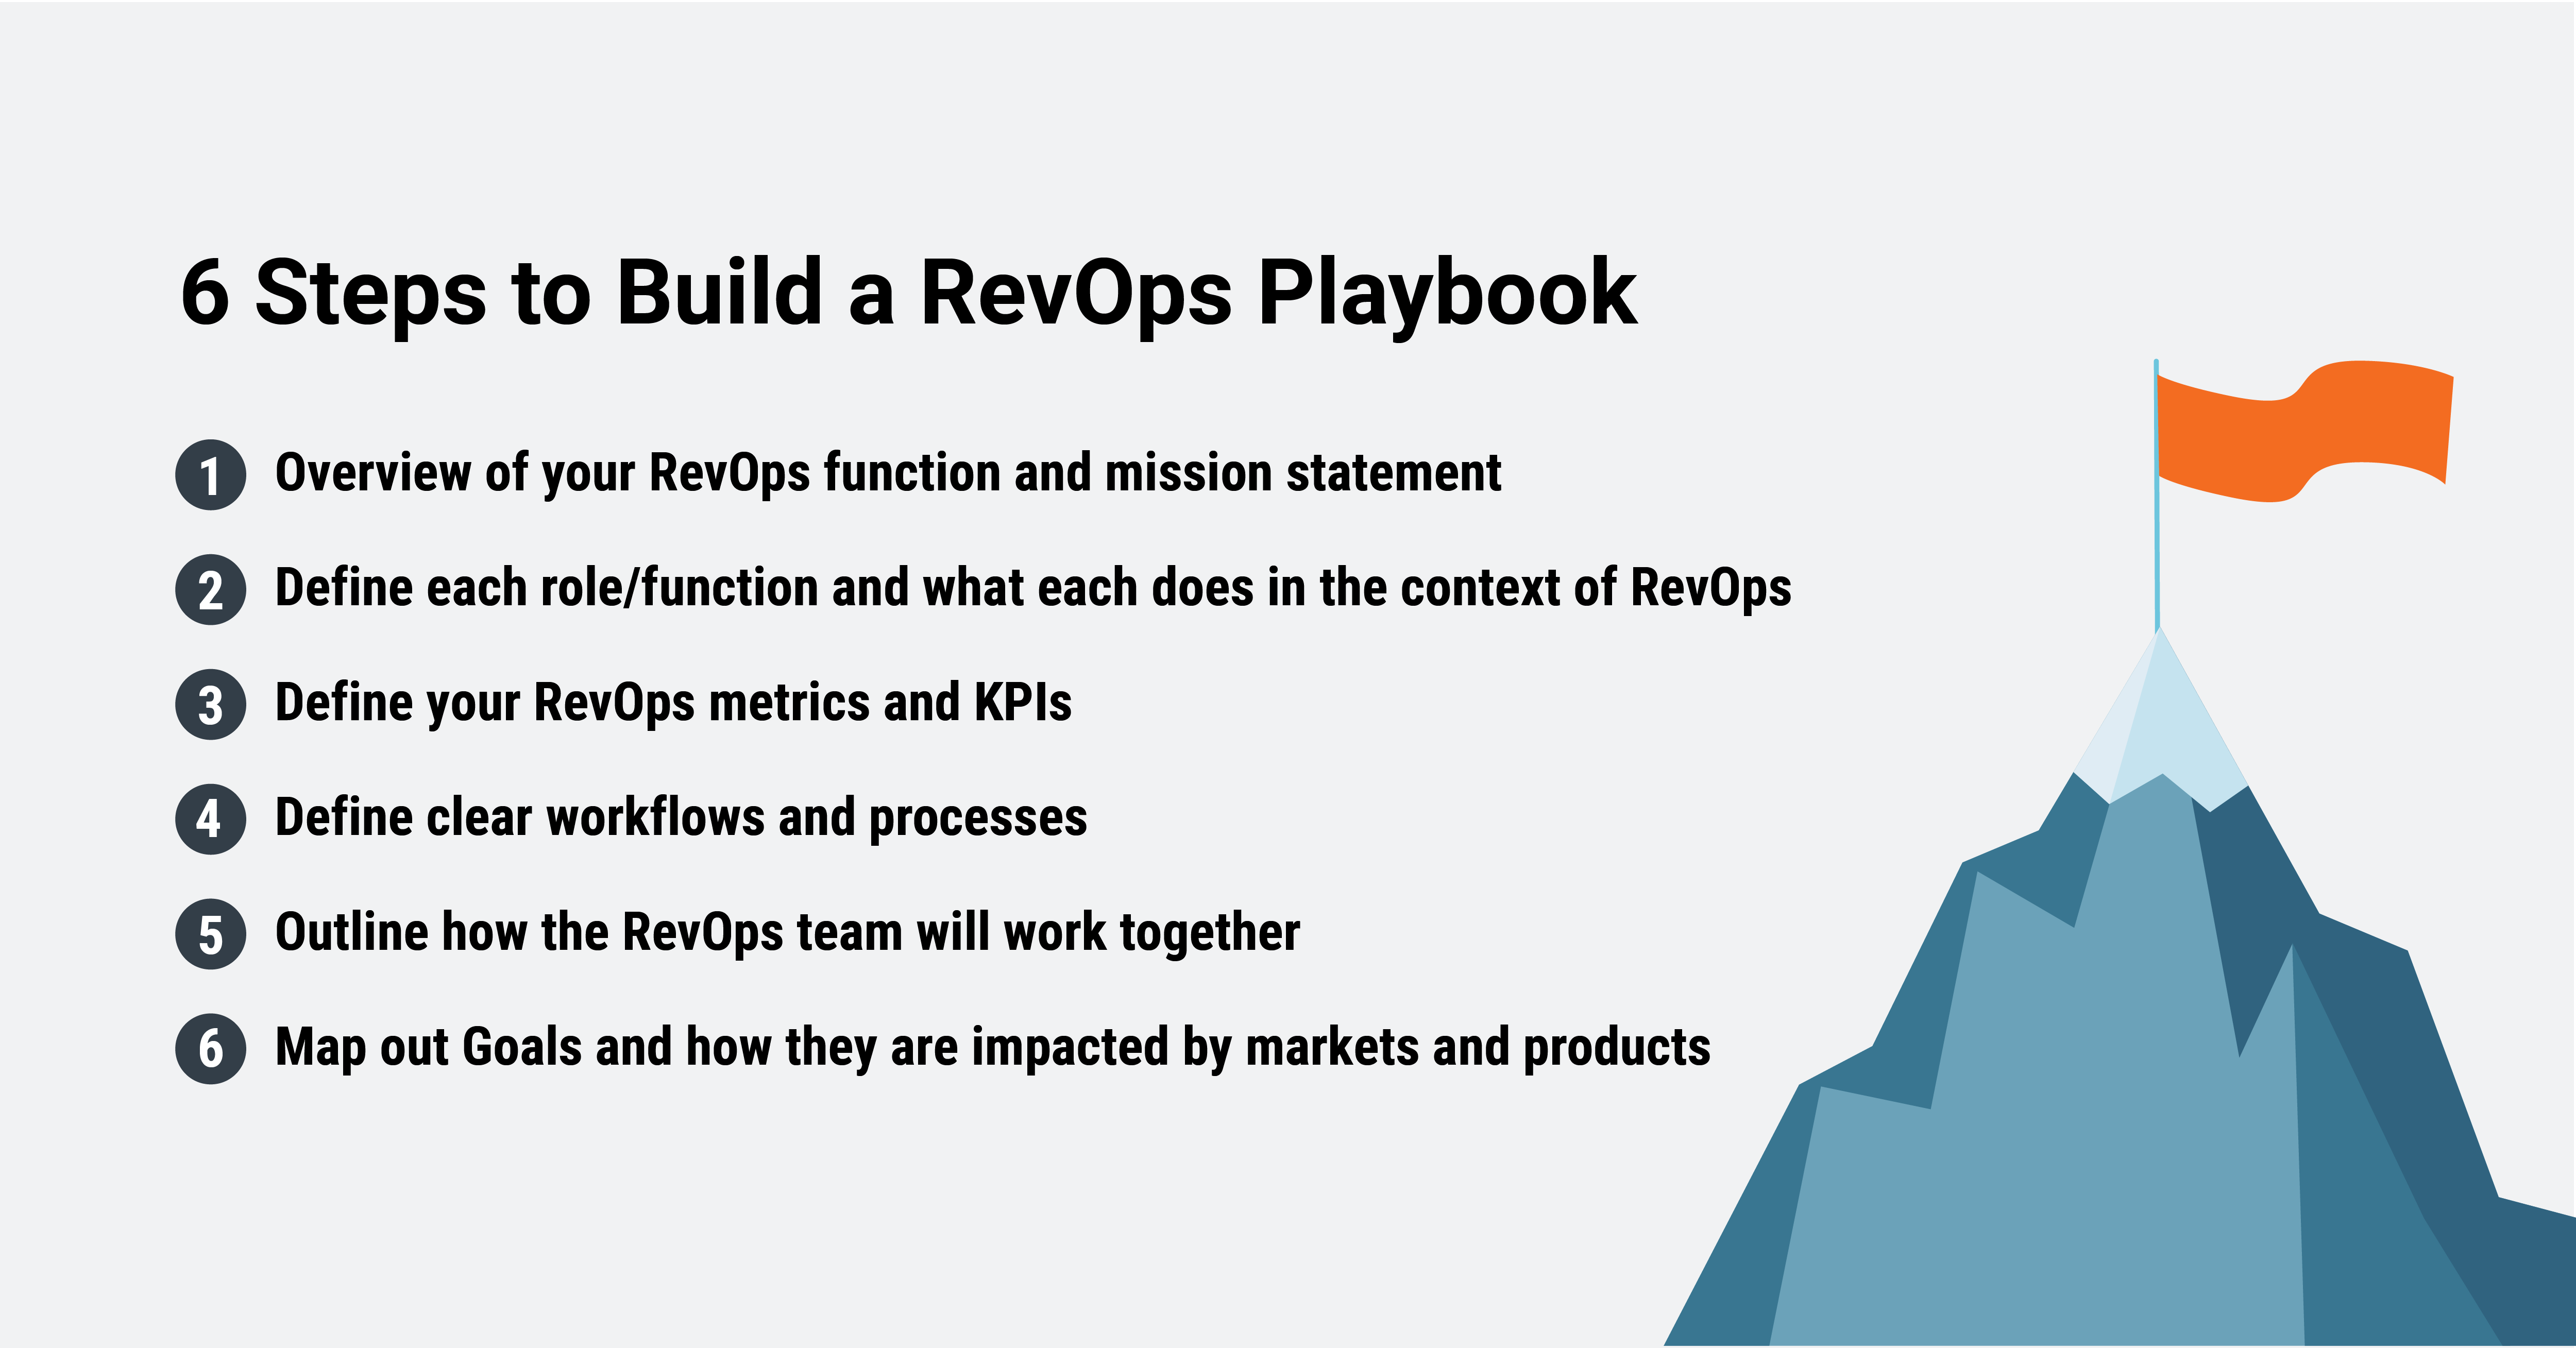 How to build RevOps playbook